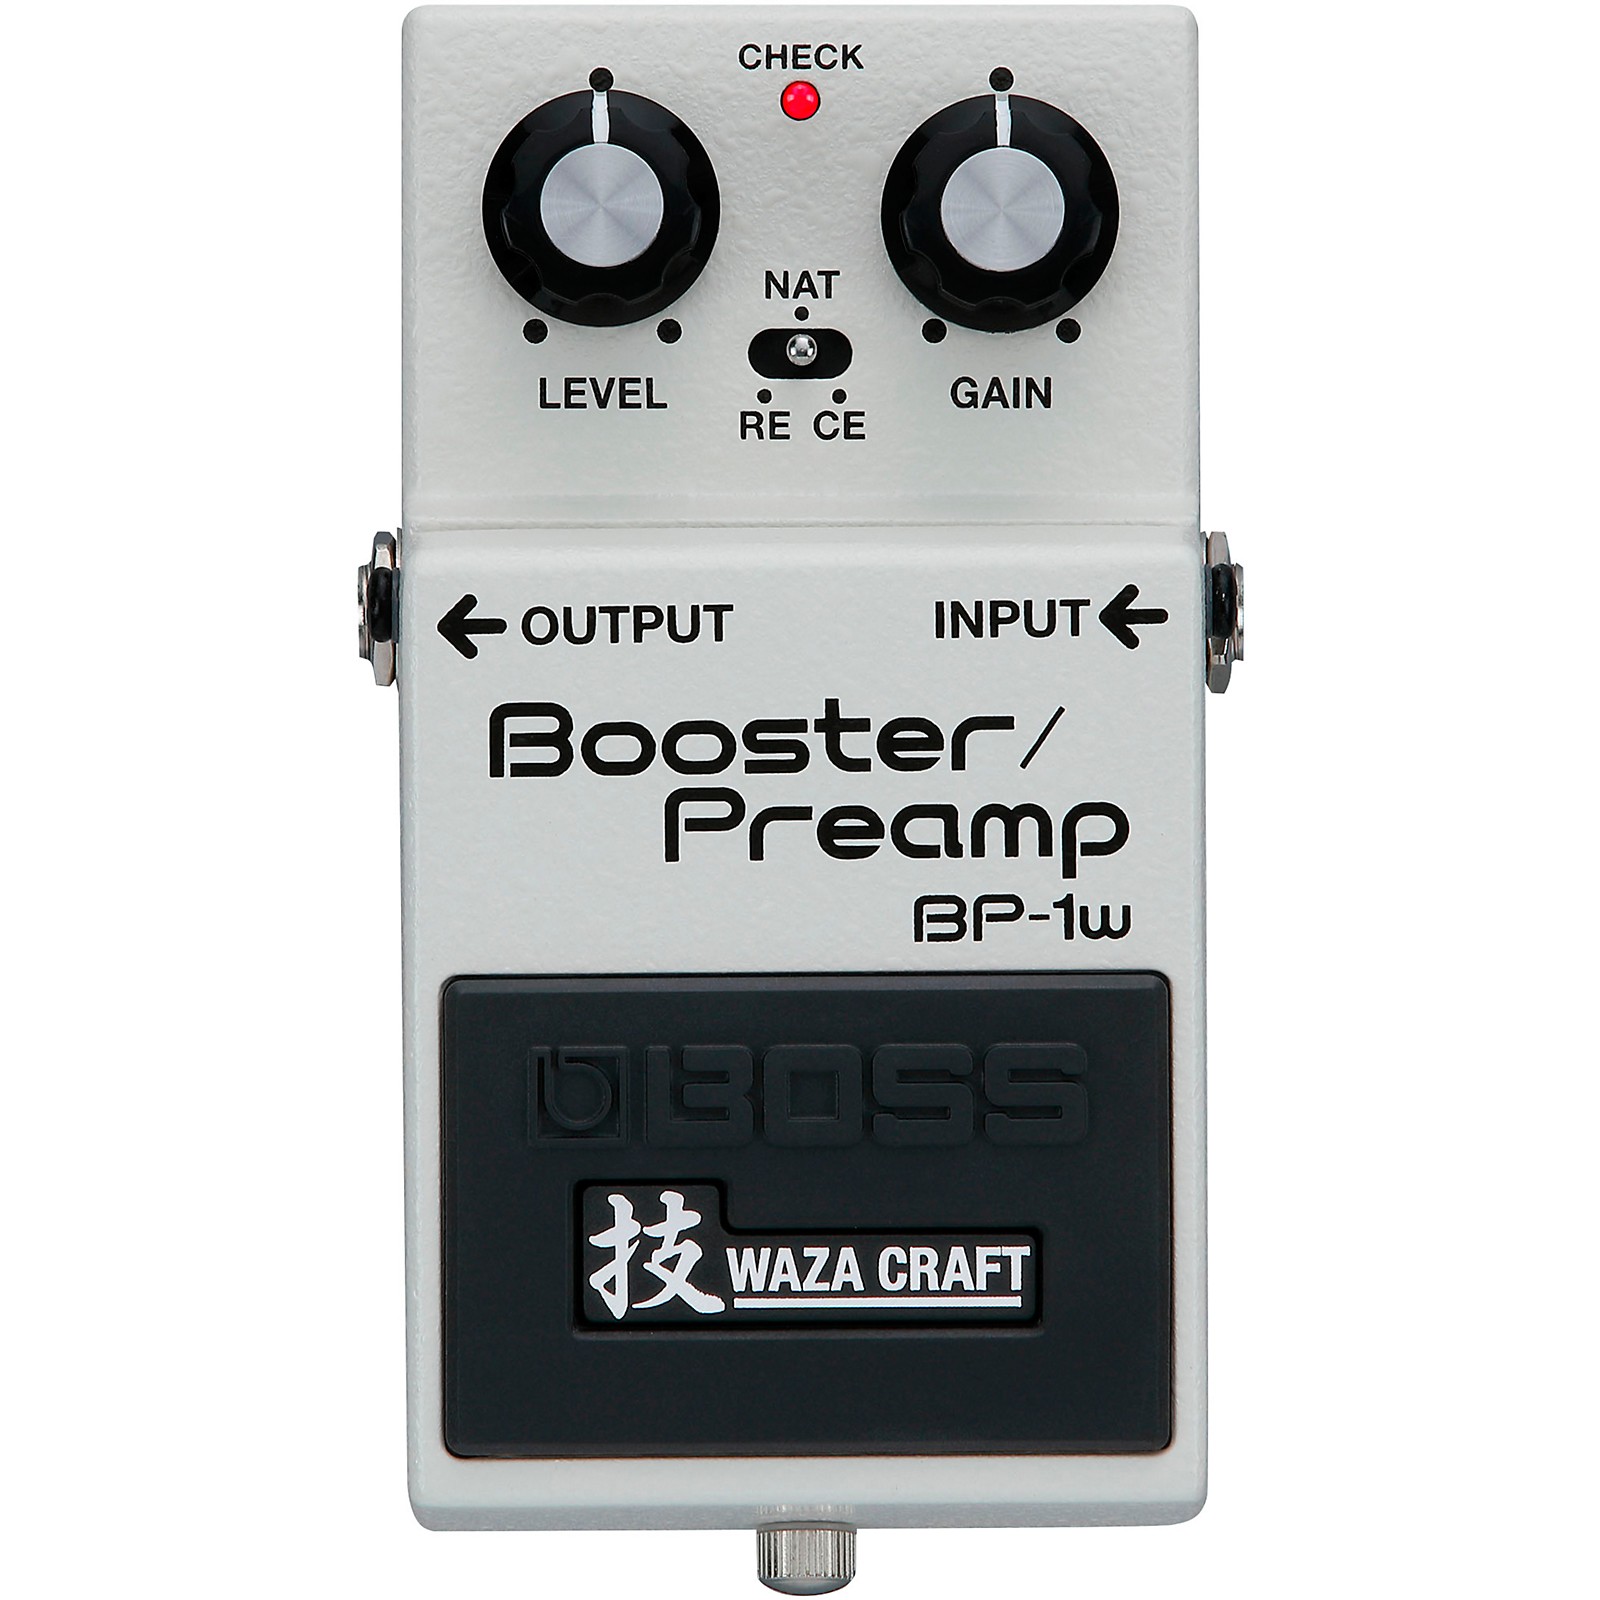 BOSS BP-1W Waza Craft Booster/Preamp Effects Pedal White